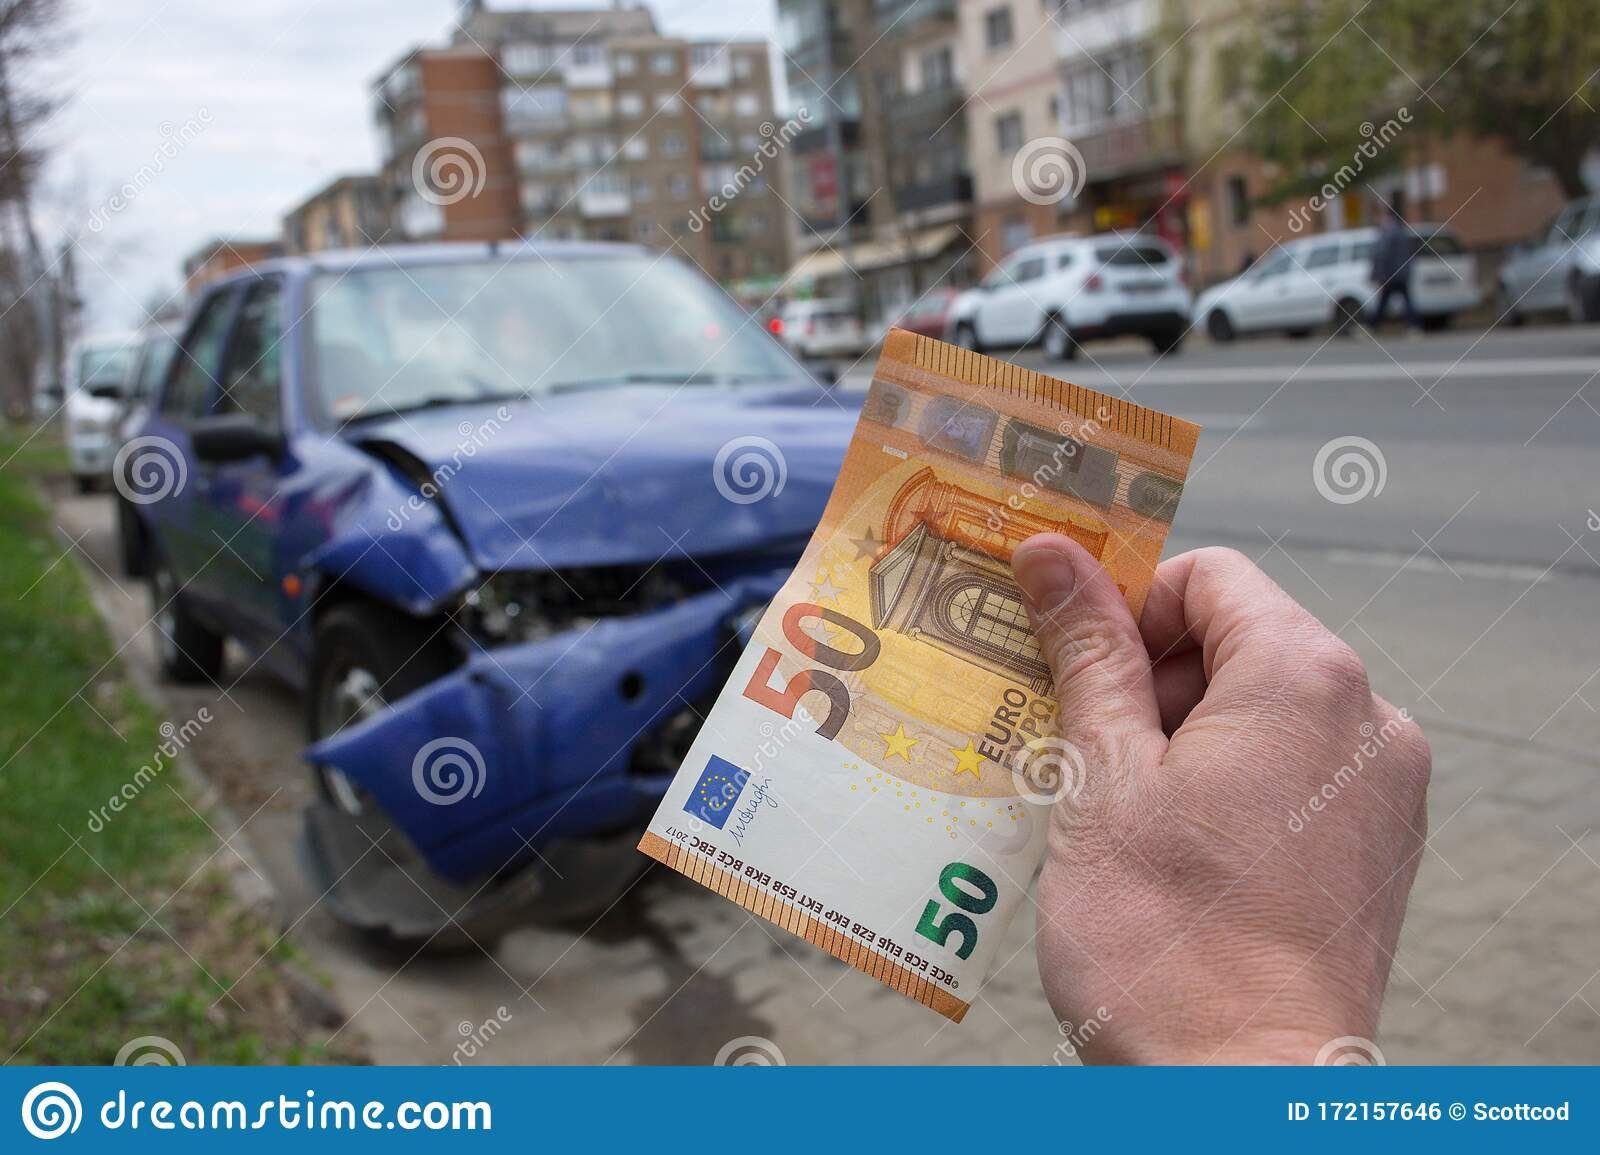 Damaged Vehicle After Car Accident Parked On The Roadside inside proportions 1600 X 1155